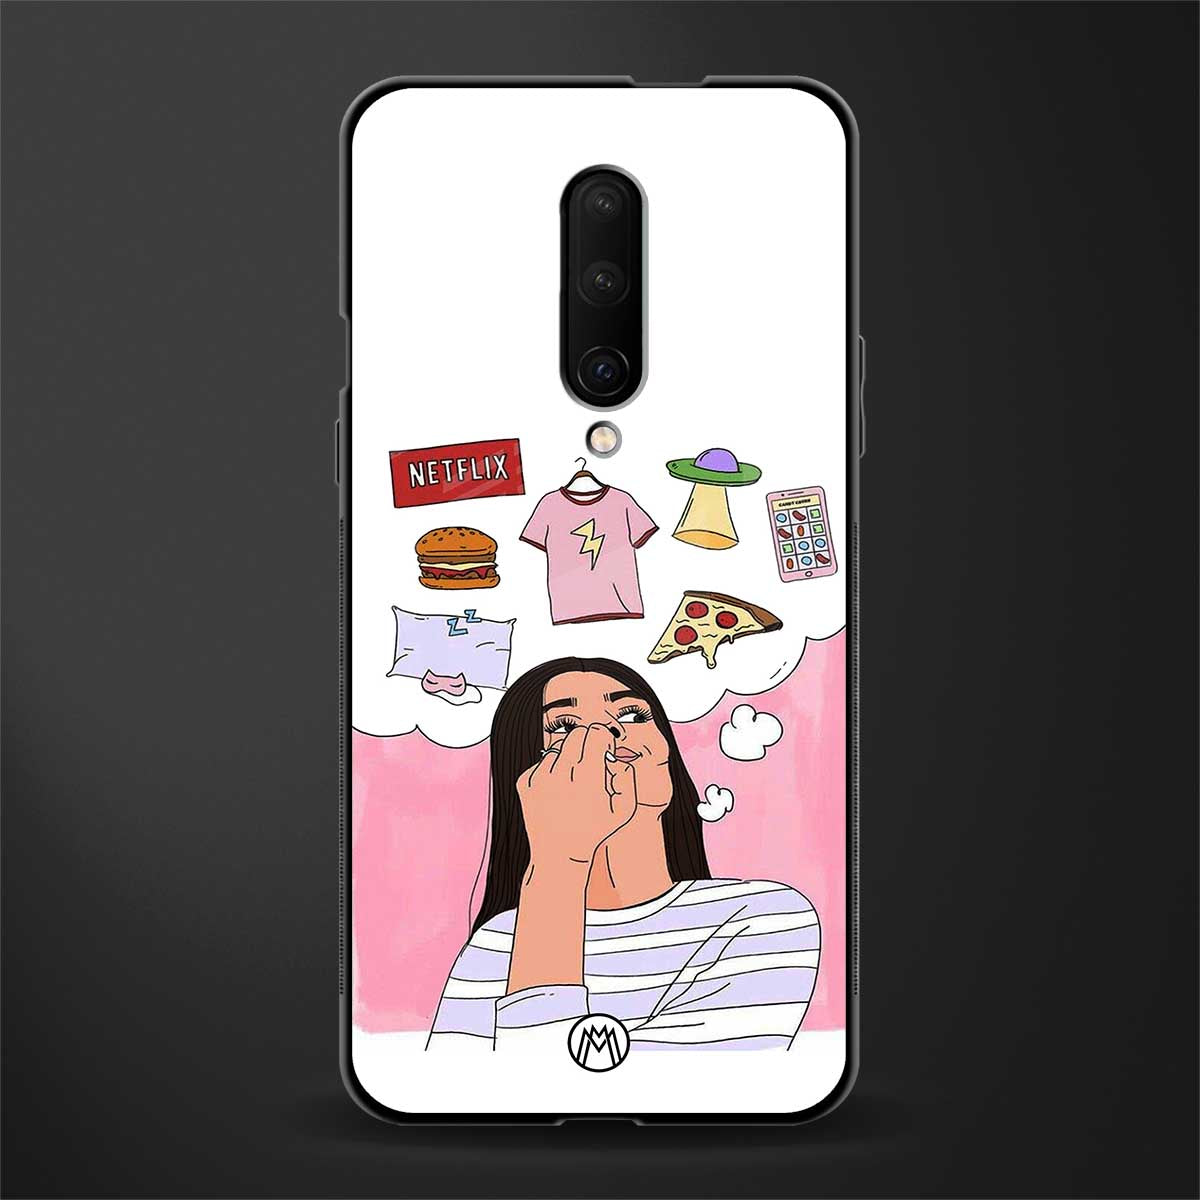 netflix and chill glass case for oneplus 7 pro image